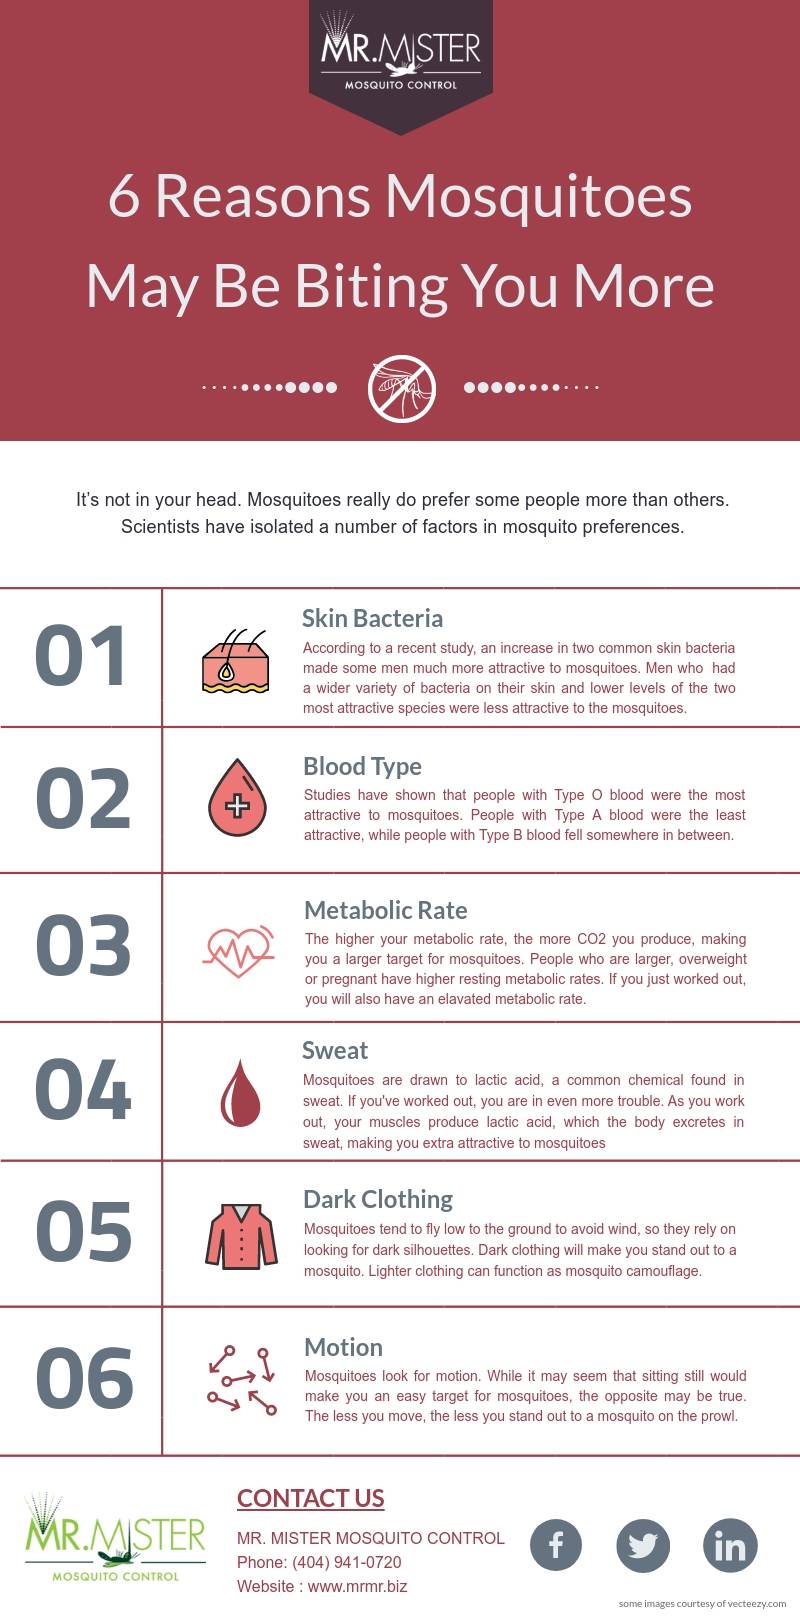 Why Mosquitoes Bite Some People More Than Others [infographic]